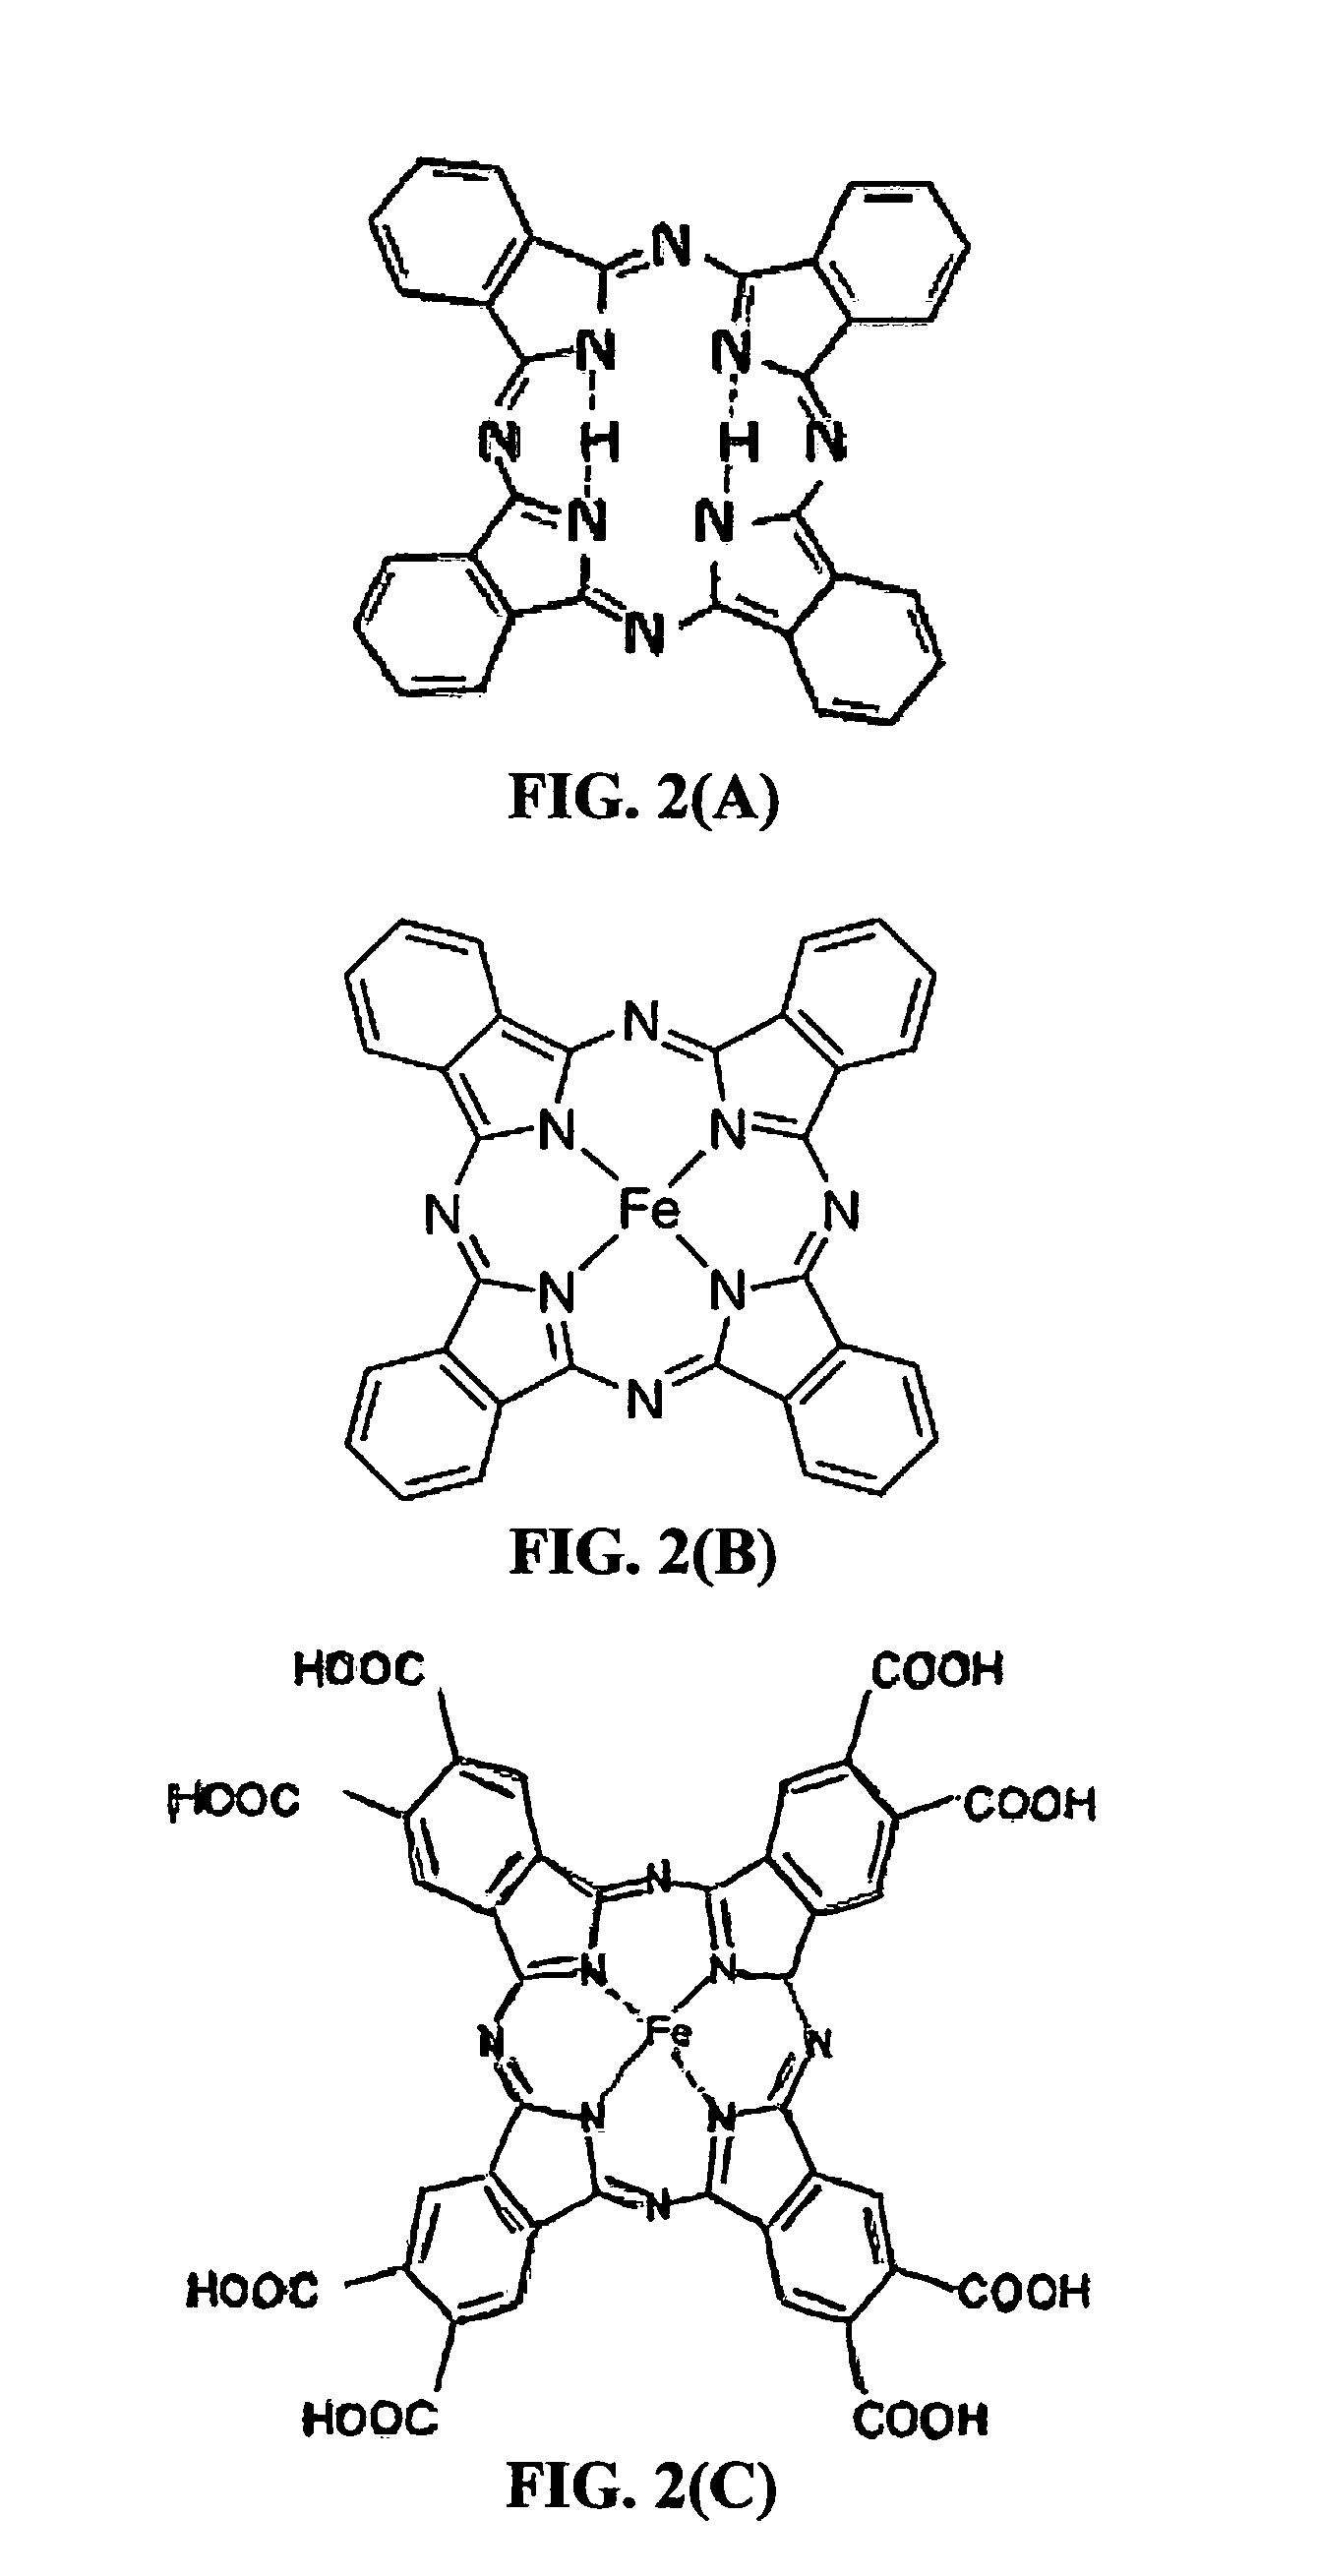 Rechargeable lithium cell having a chemically bonded phthalocyanine compound cathode